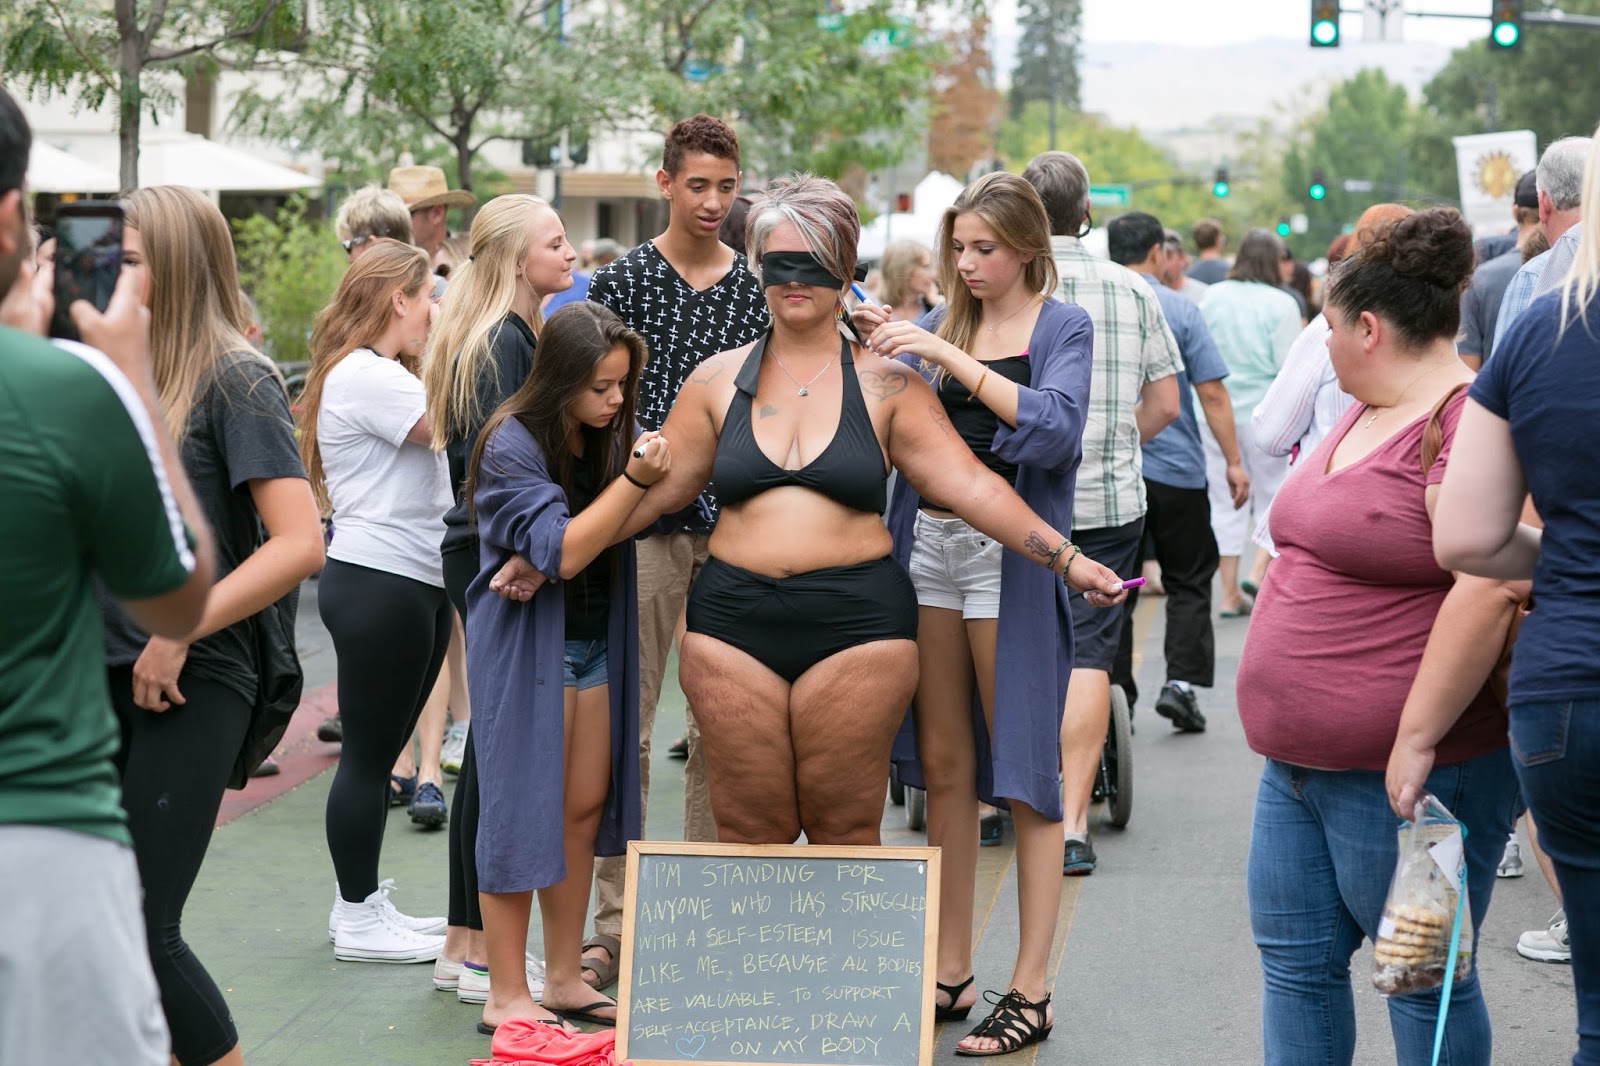 Woman Strips Down in Public to Promote Body Self-Acceptance 